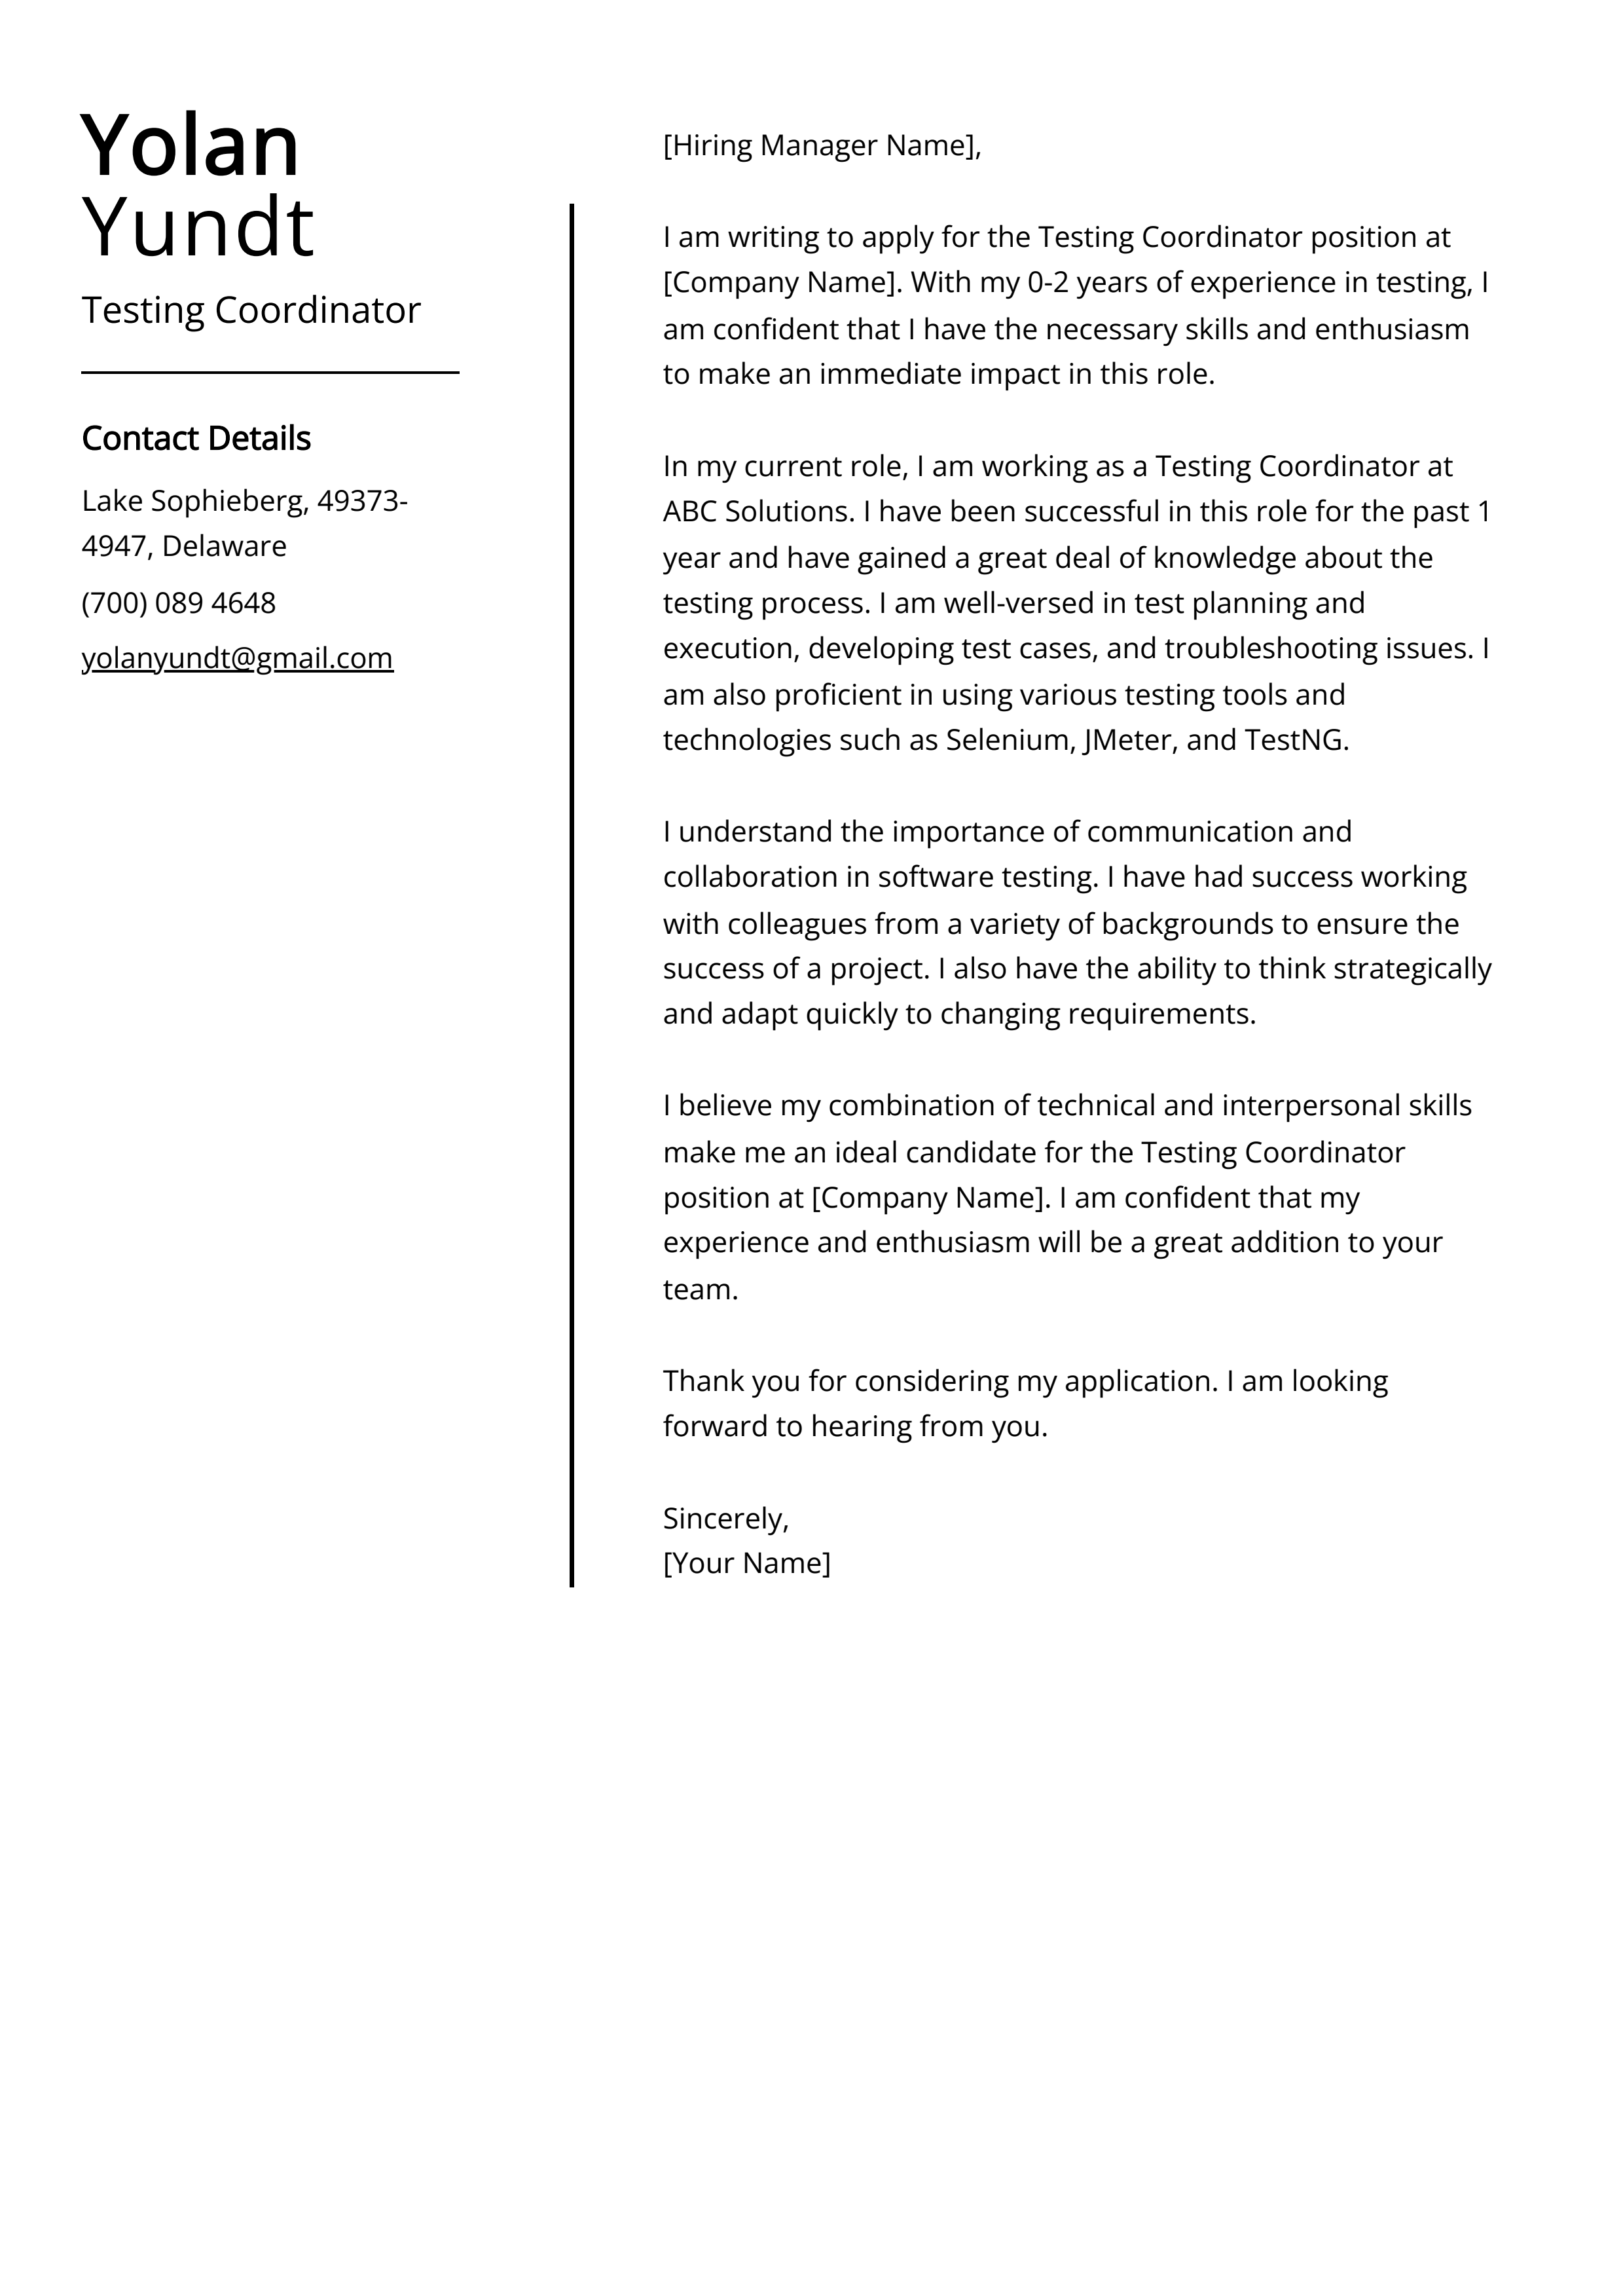 Testing Coordinator Cover Letter Example